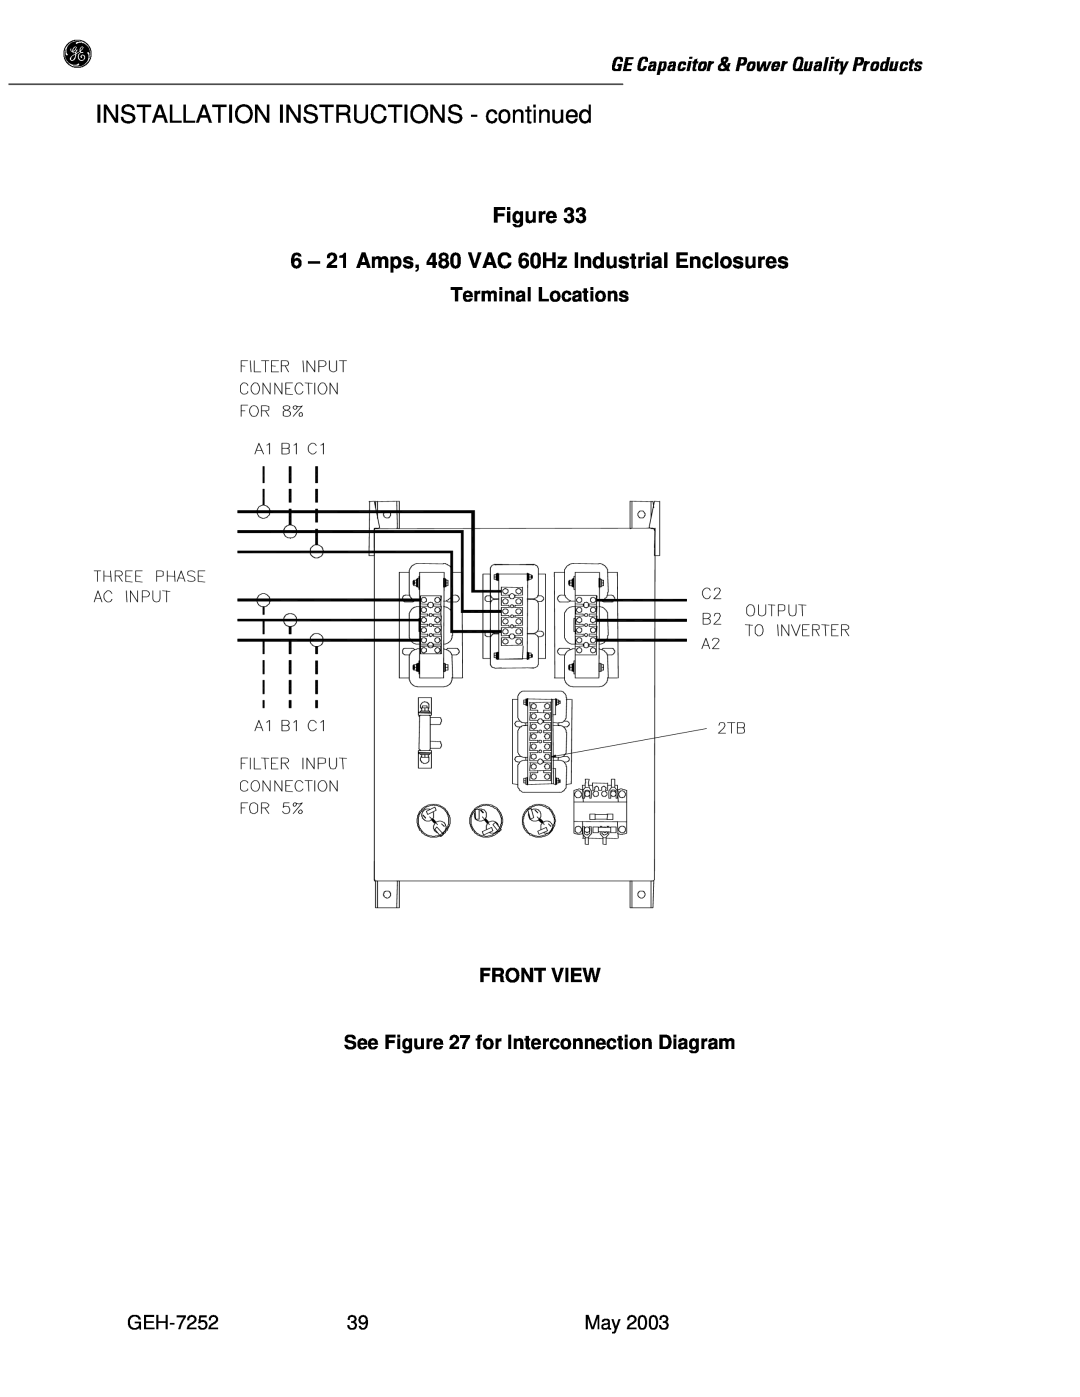 GE SERIES B 480 user manual 6 - 21 Amps, 480 VAC 60Hz Industrial Enclosures, INSTALLATION INSTRUCTIONS - continued 